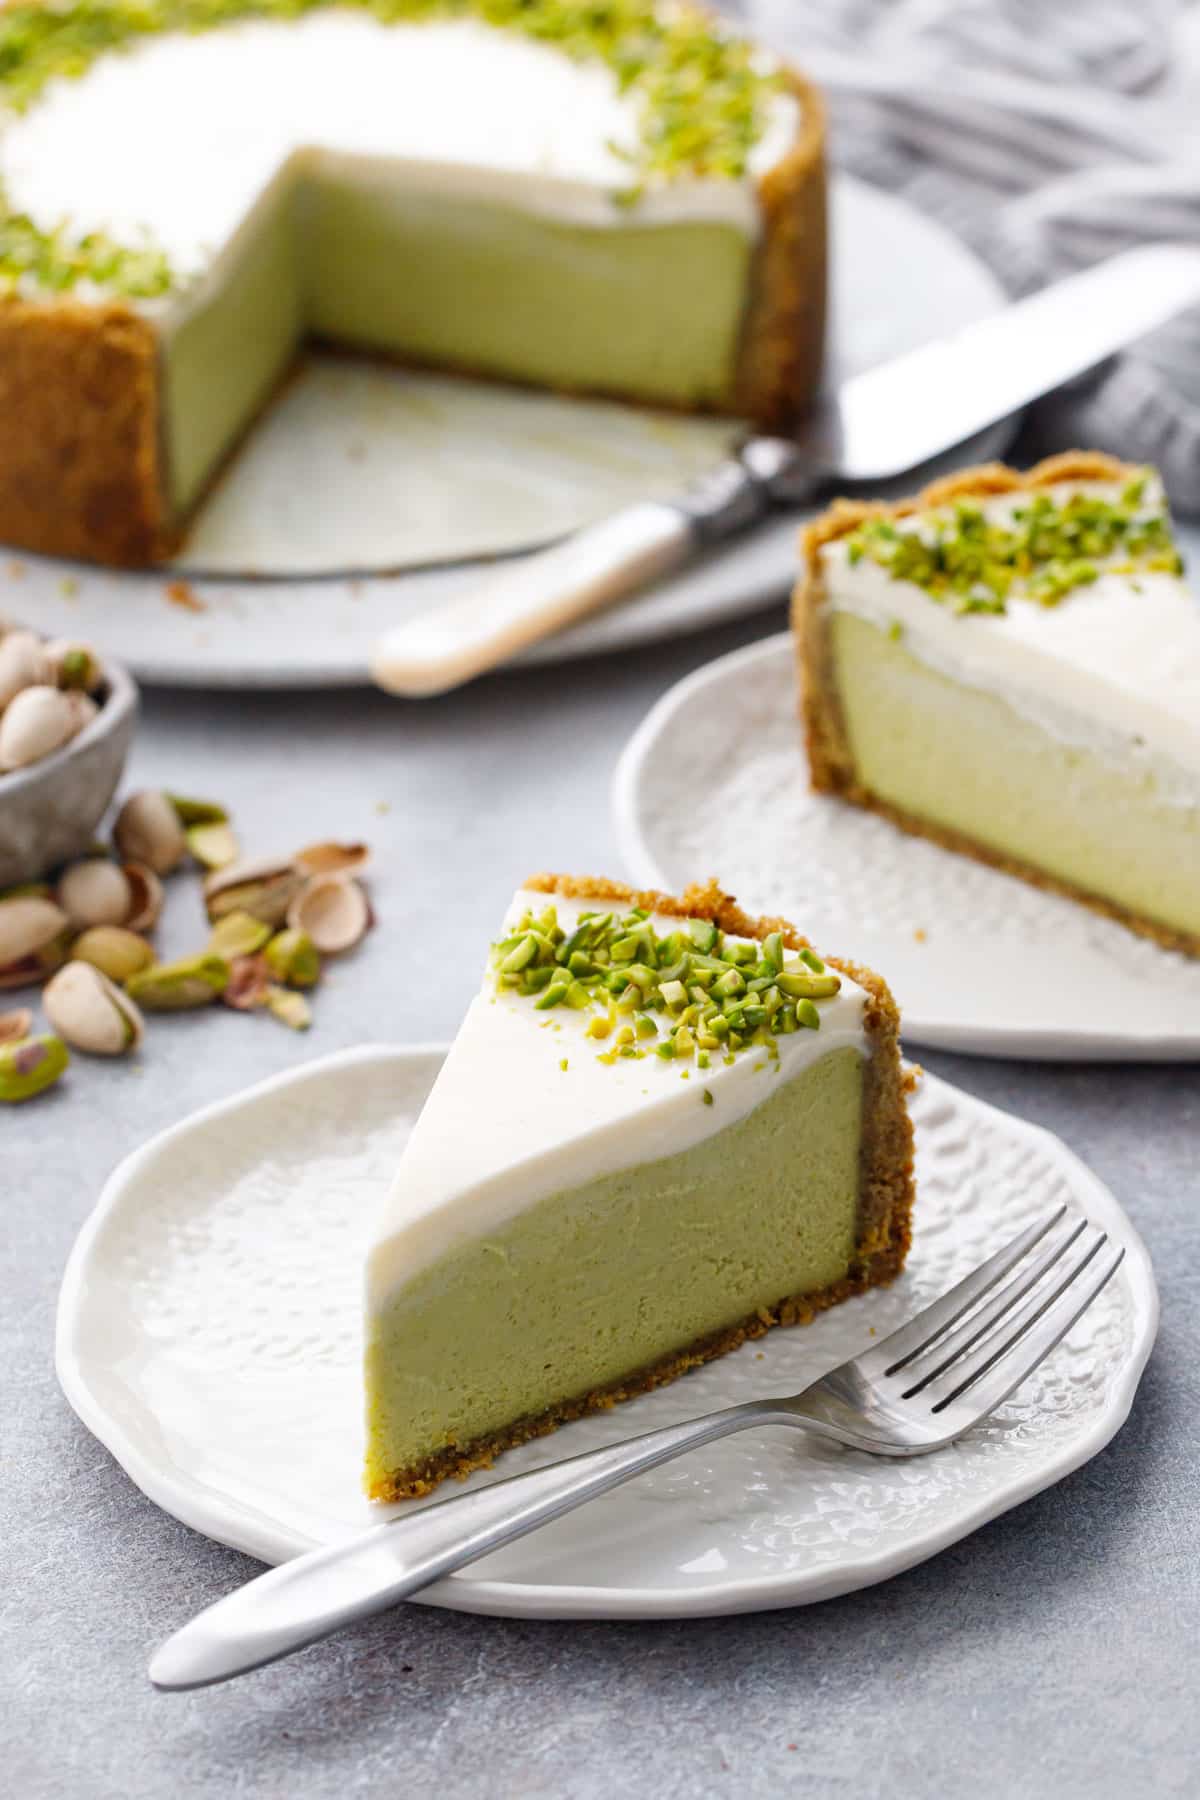 Perfectly cut slices of Pistachio Sour Cream Cheesecake with a green-tinted filling, sour cream layer, and a border of chopped green pistachios.